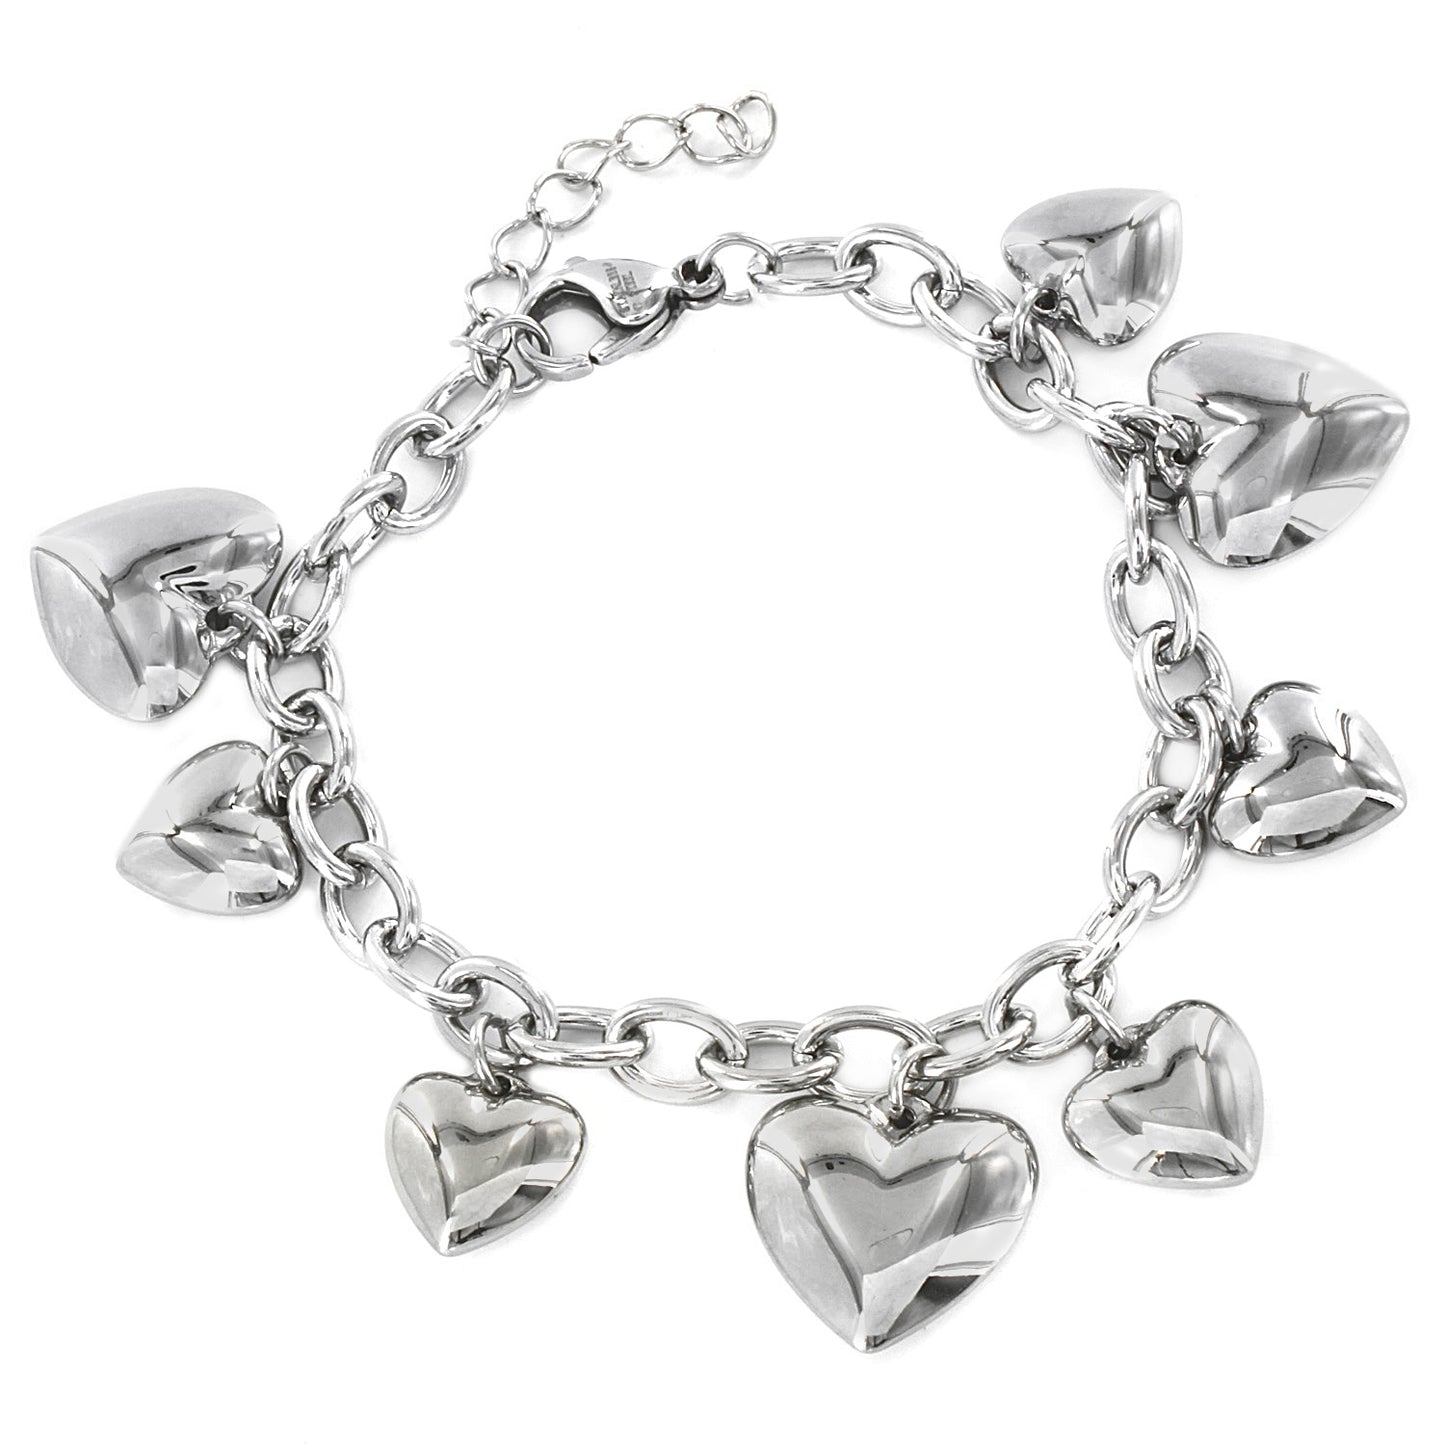 Women's Polished Dangling Puffed Hearts Stainless Steel Bracelet and Necklace Set